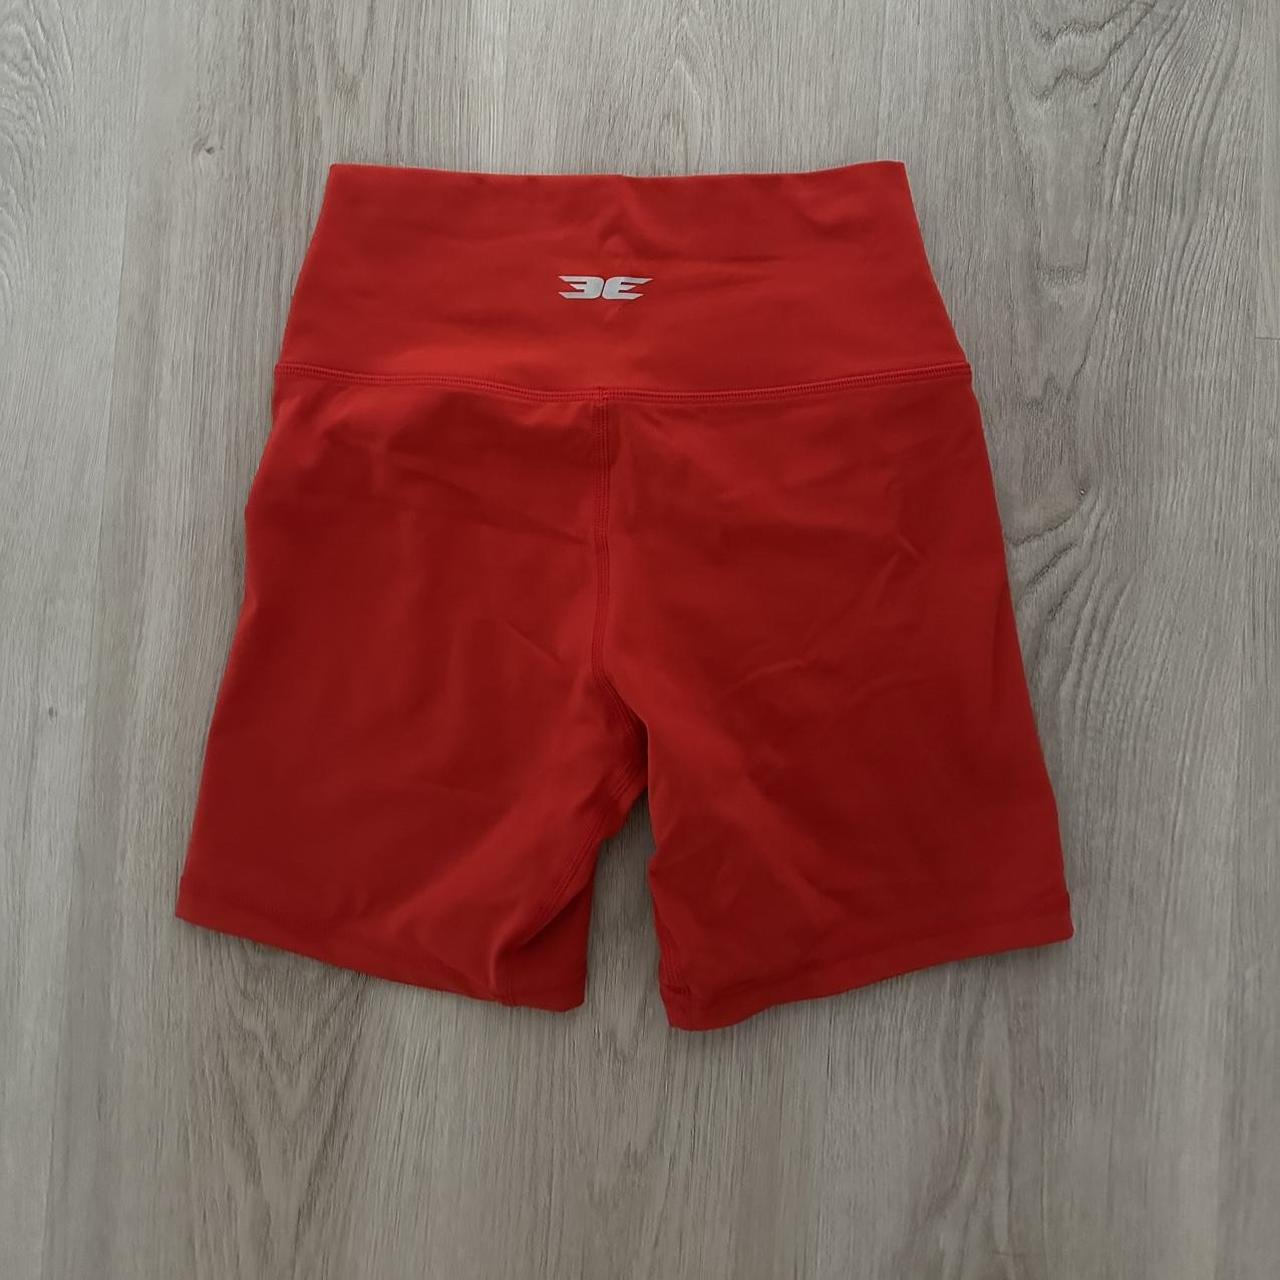 Elite Eleven Red Shorts - Worn once - Fits XS/S - Depop